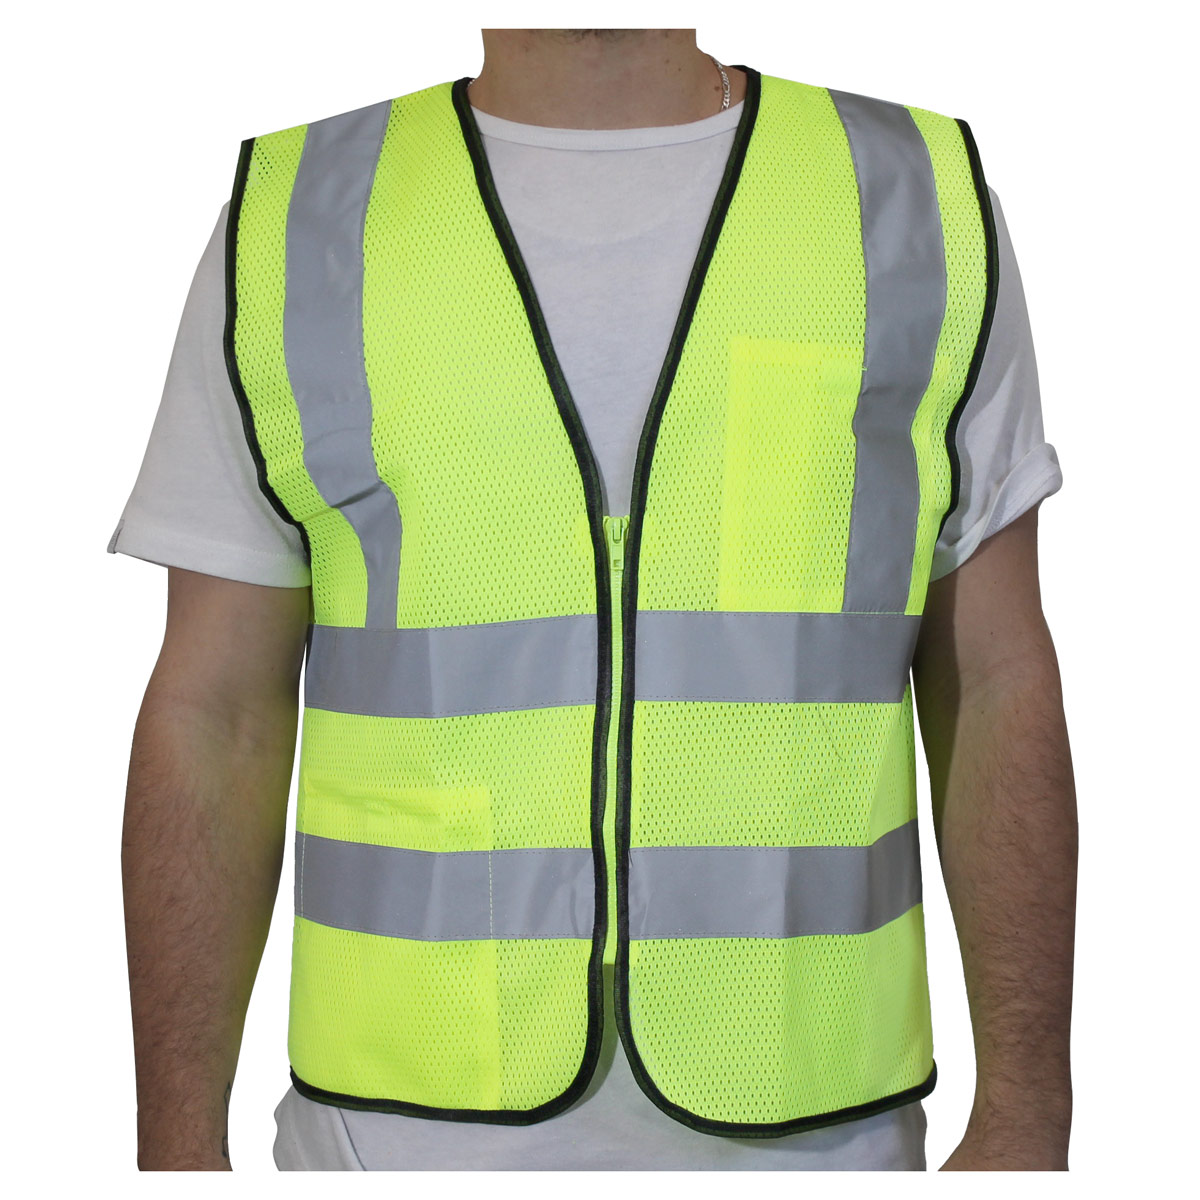 Rugged Blue Type R Class 2 High-Vis Two-Tone Mesh Safety Vest - High Vis Yellow